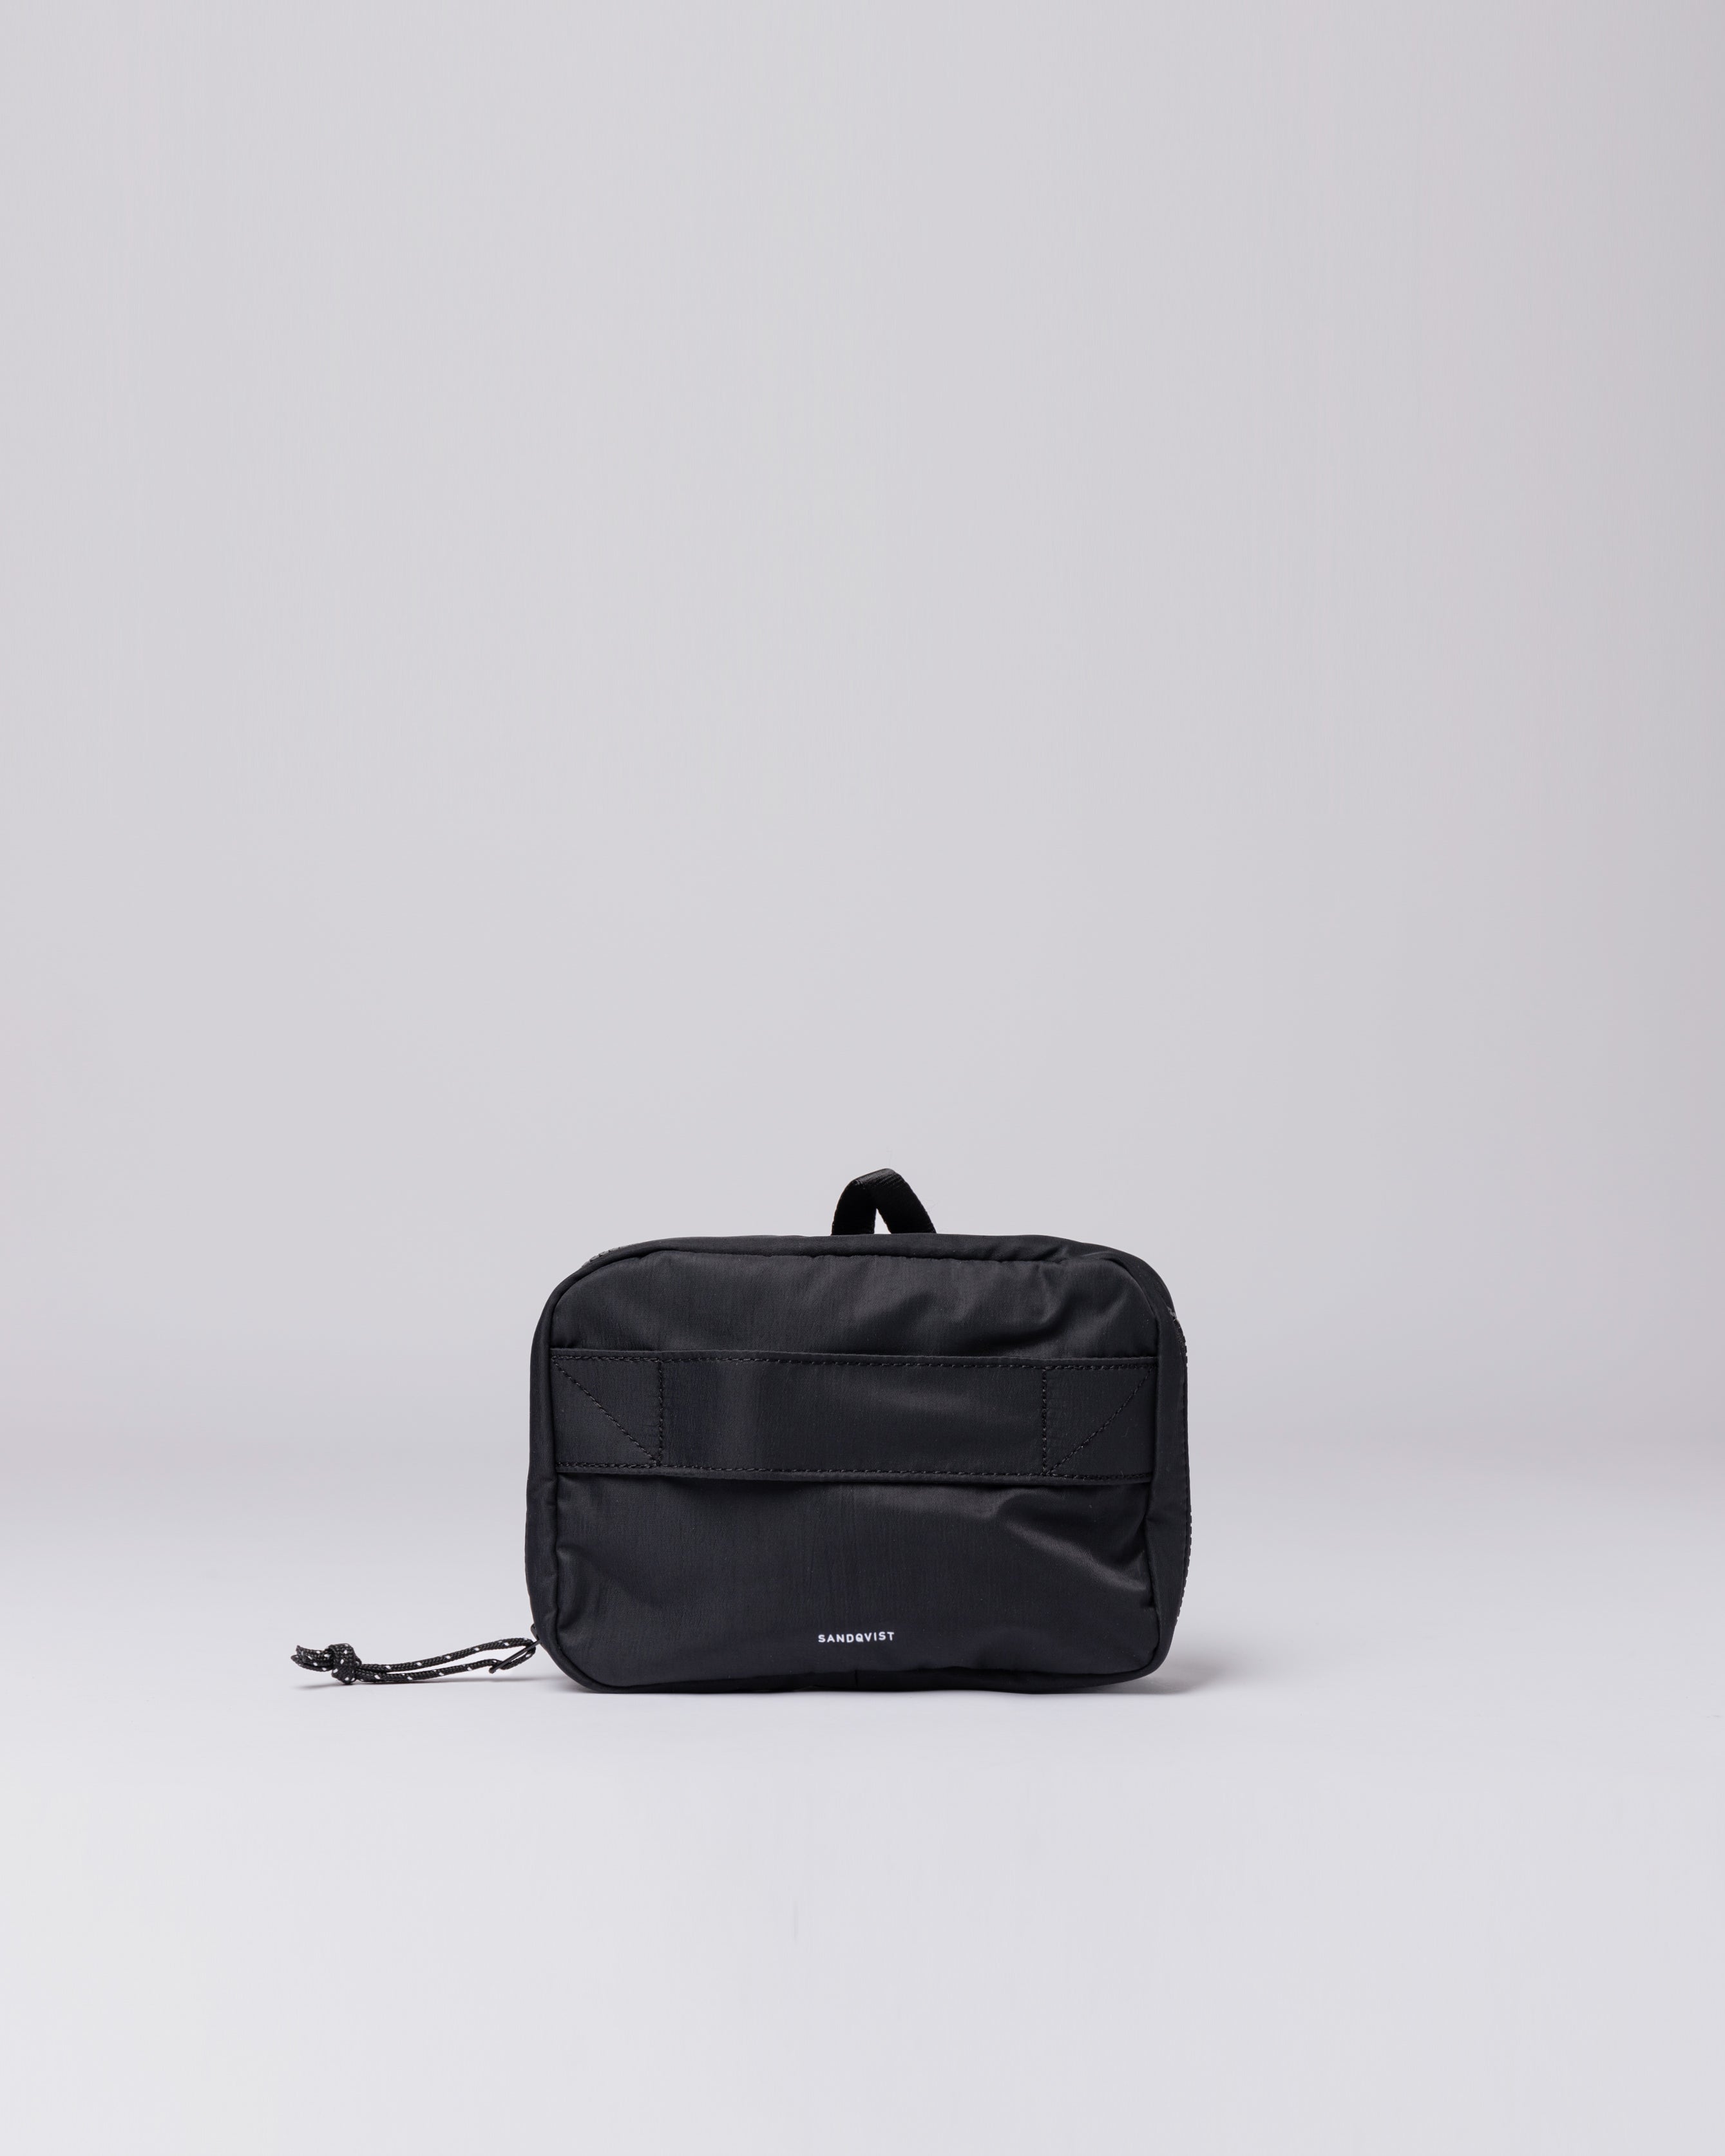 Sandqvist Everyday Washbag in Black SQA2099 | Shop from eightywingold an official brand partner for Sandqvist Canada and US.